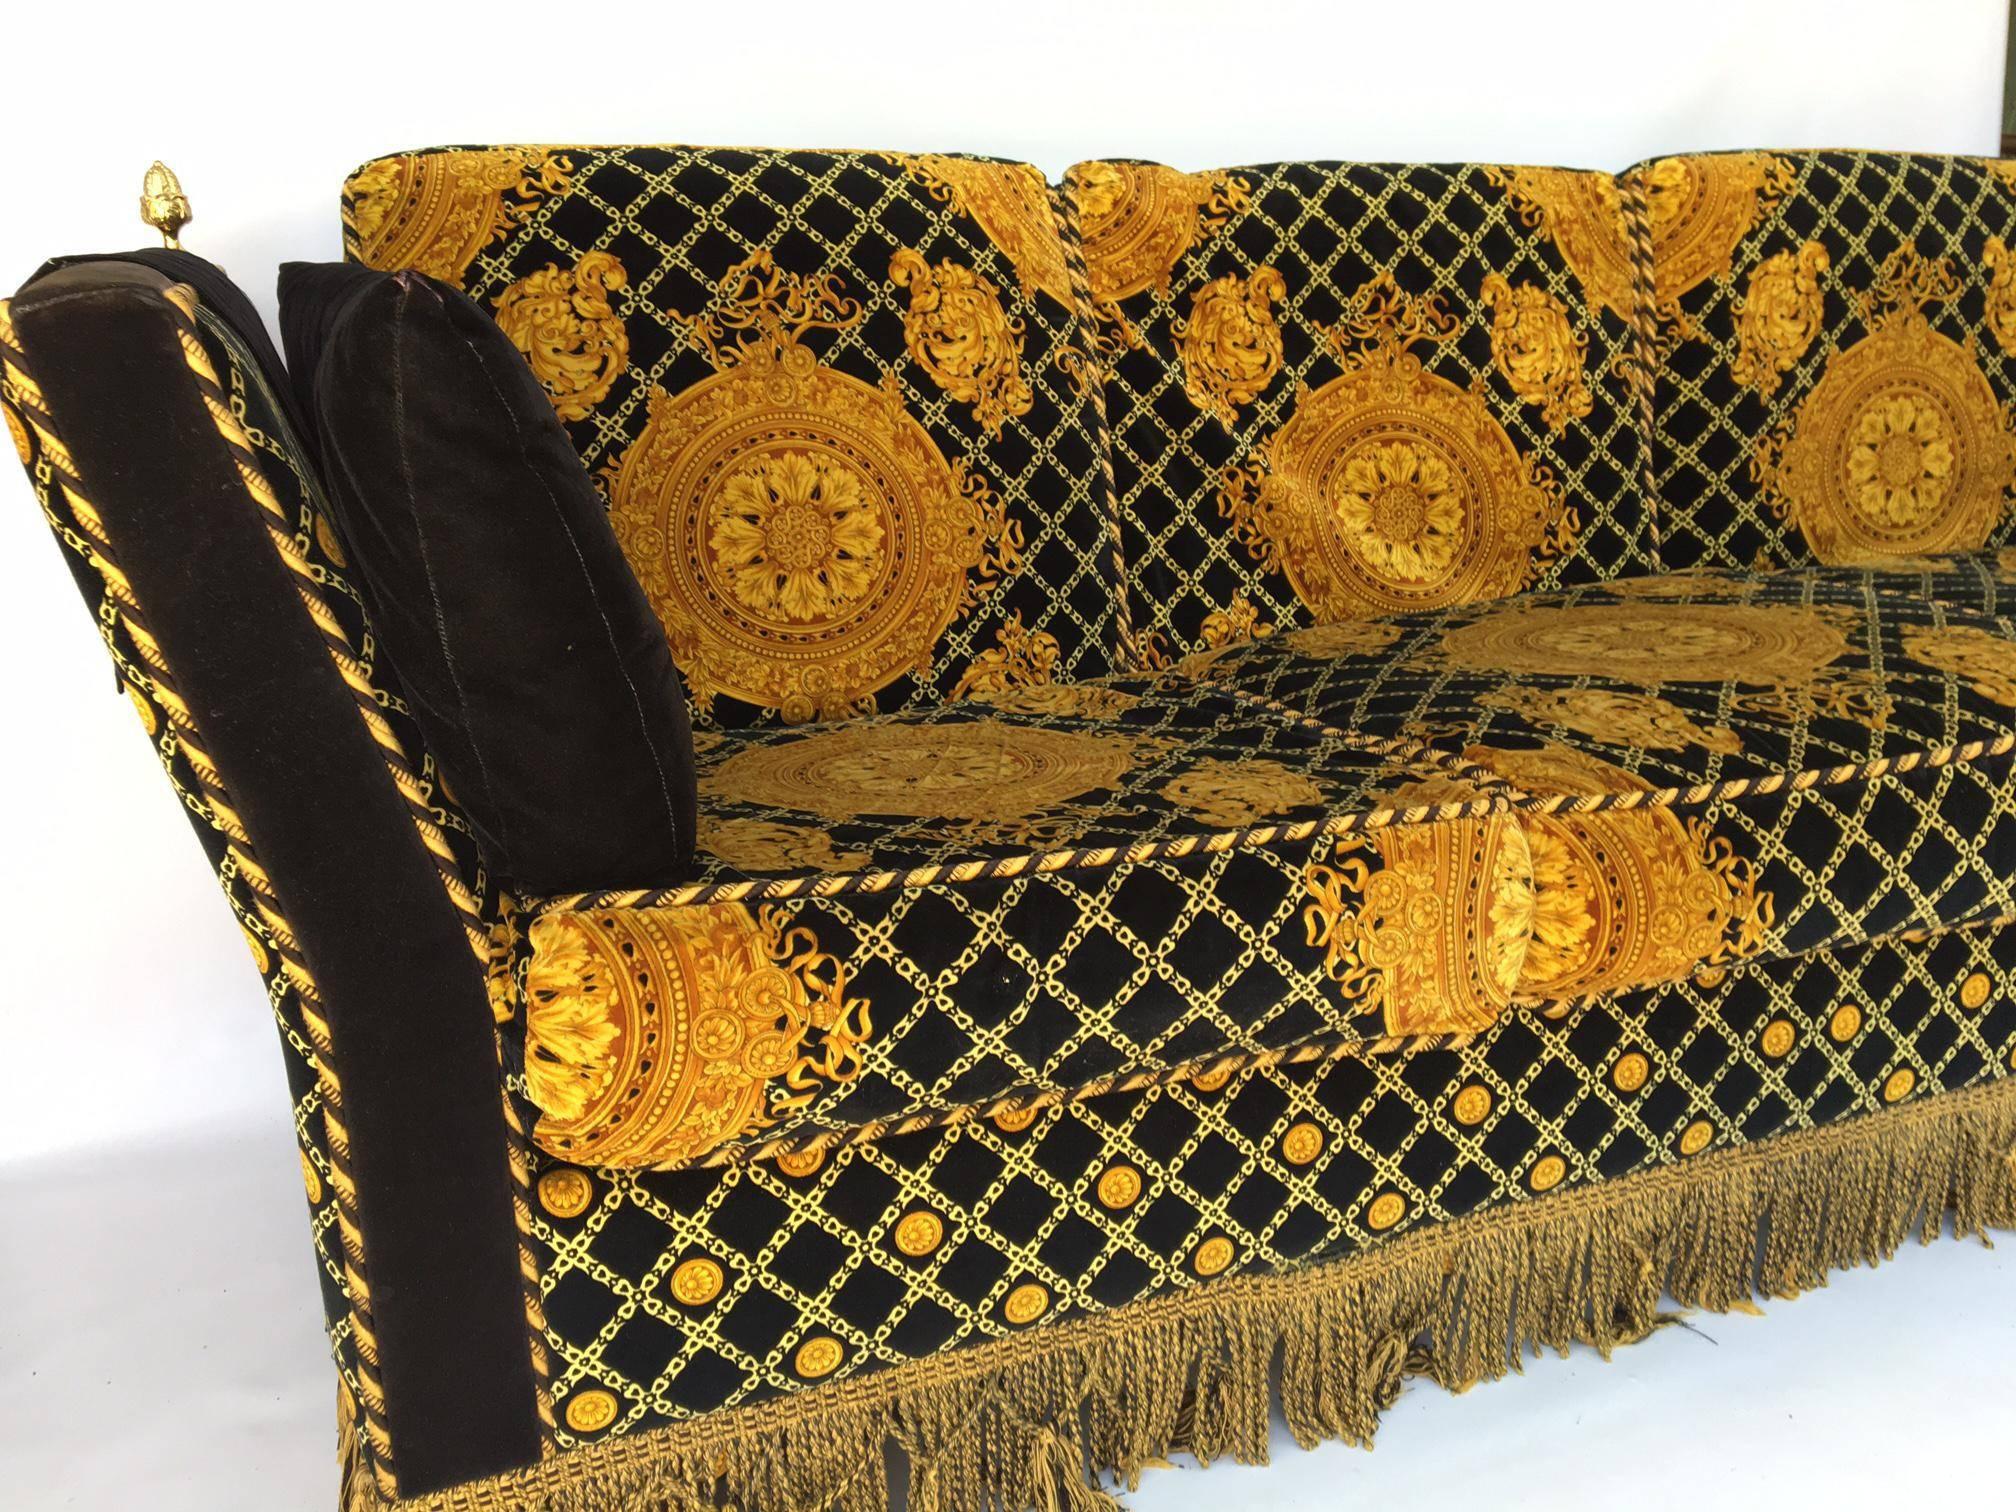 Rare Knole style sofa upholstered in plush velvet with a Gianni Versace inspired print. Adorned with brass finials. Marked Stefano Giovanni (Jiovanni) and made in Italy. The Knole settee dates back to the 17th century and this 1980s version is